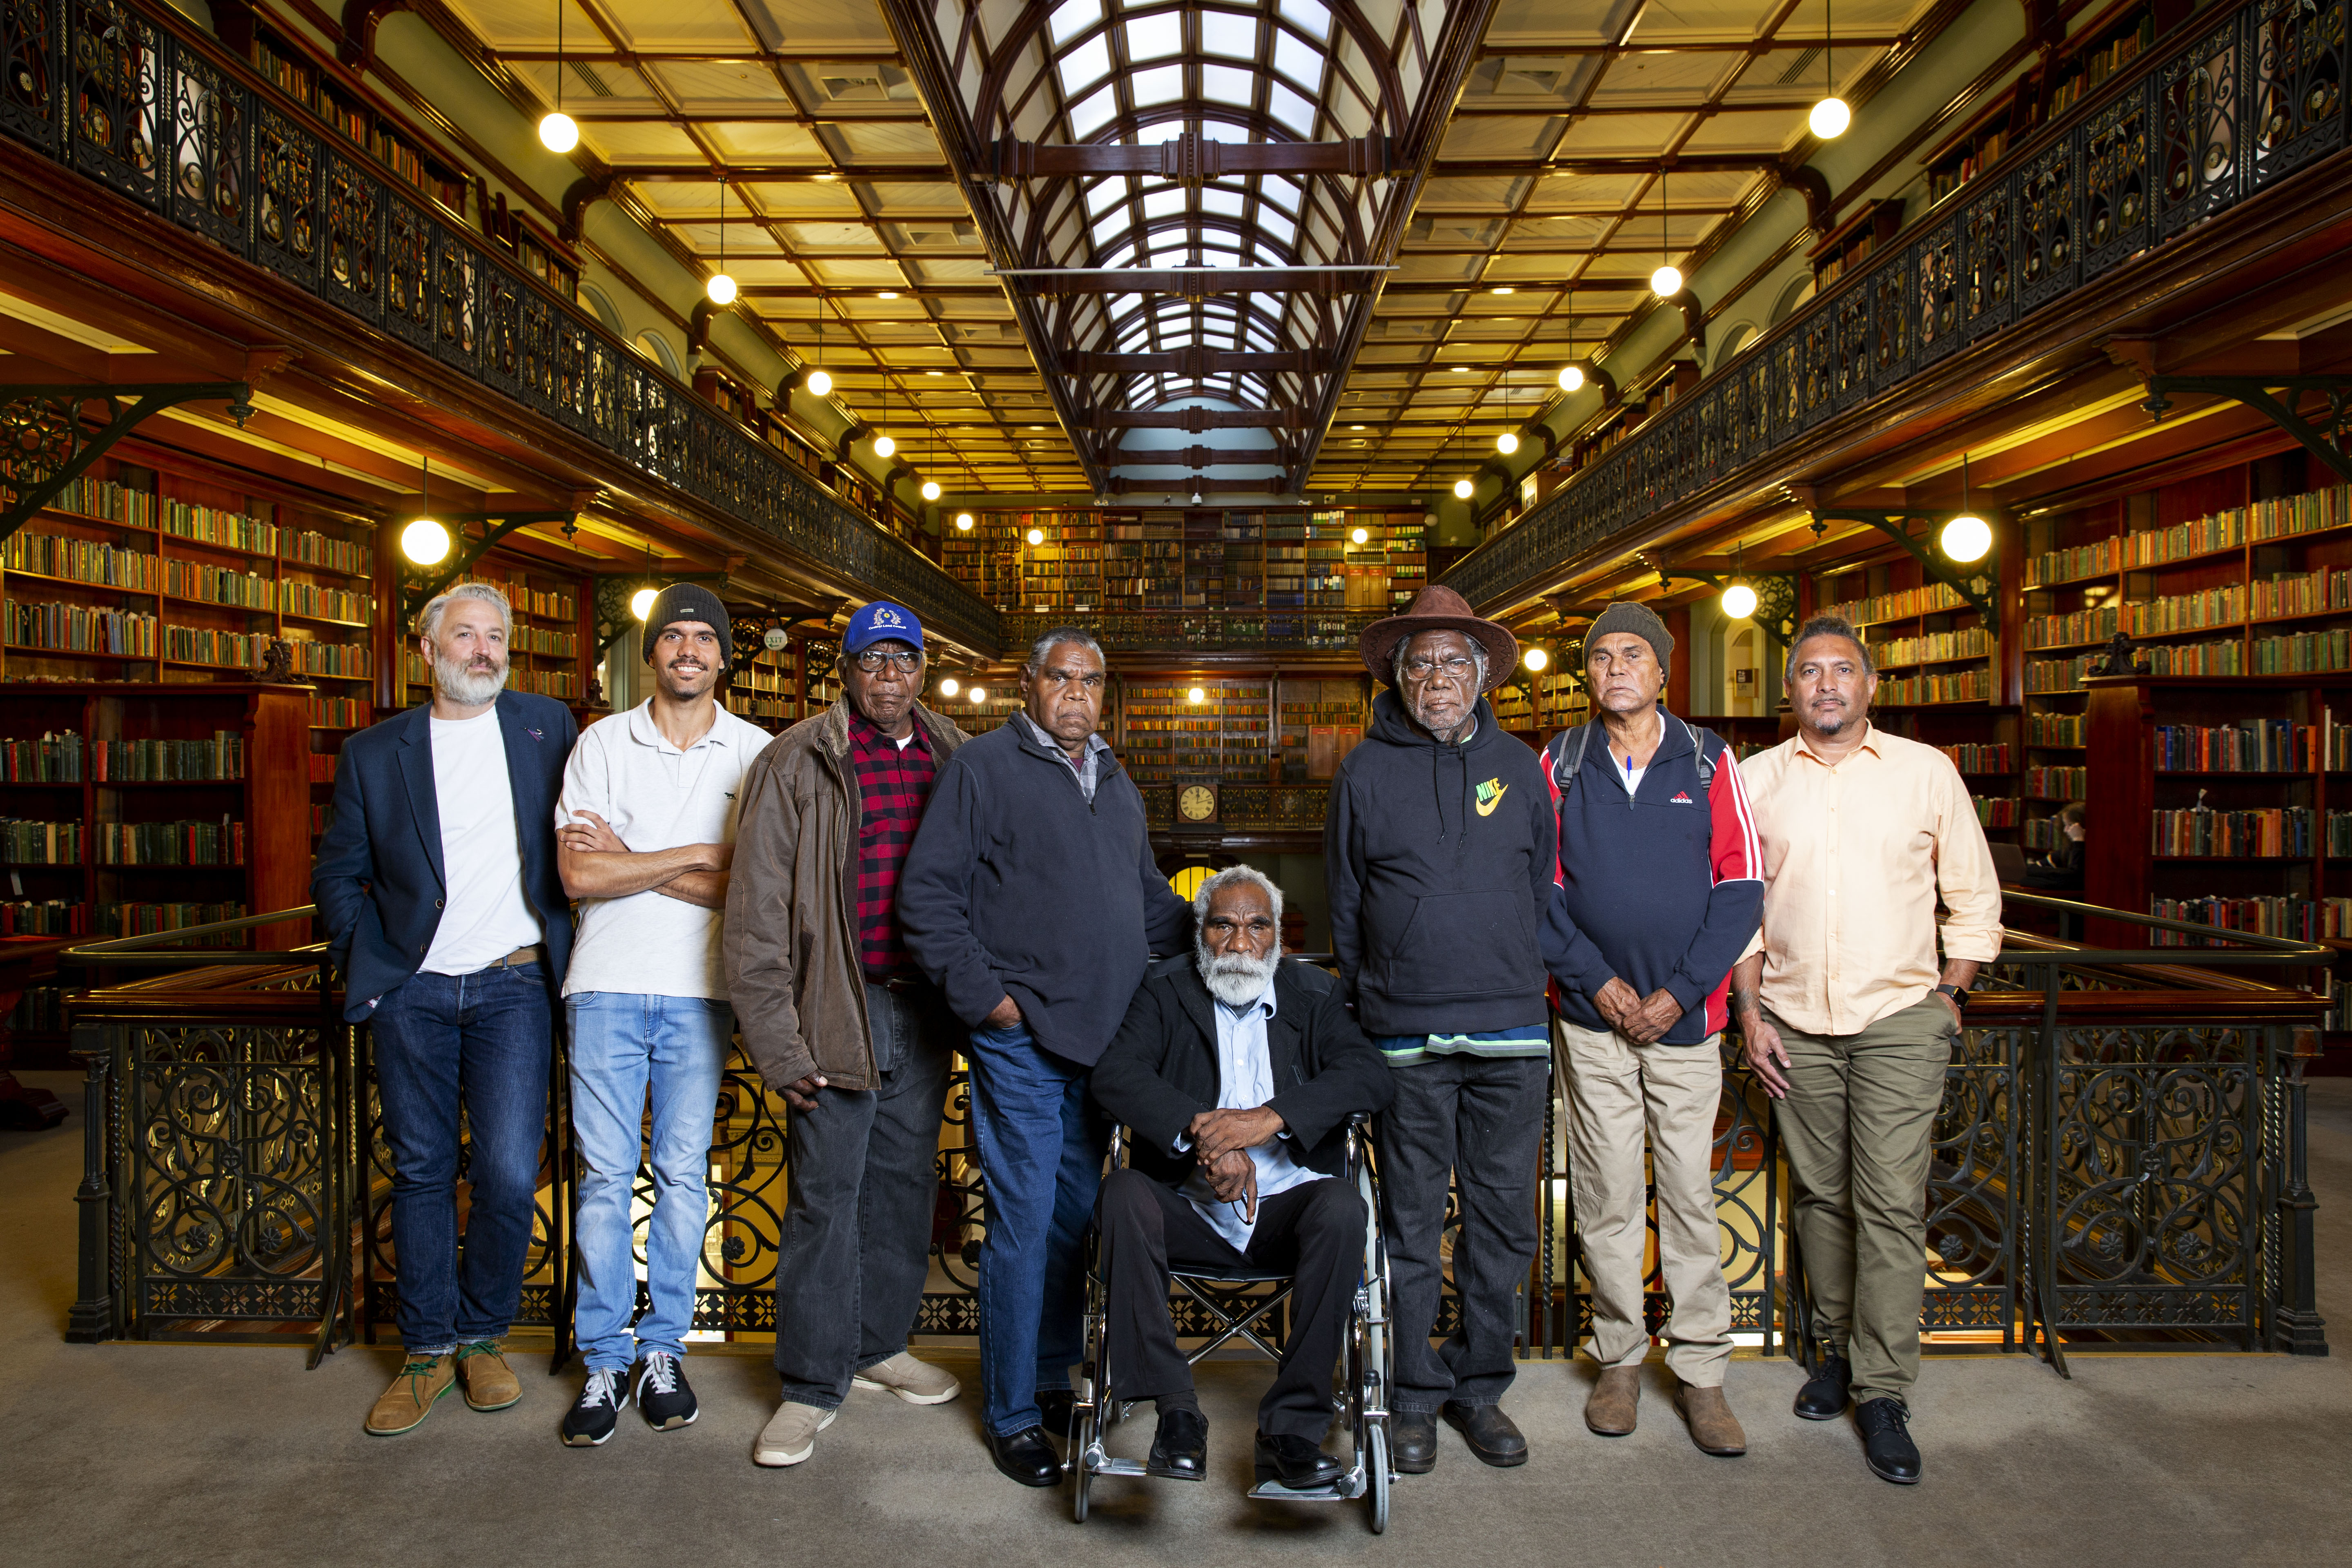 Walpiri Elders visiting the State Library, location Mortlock Library. Photographer Toby Woolley